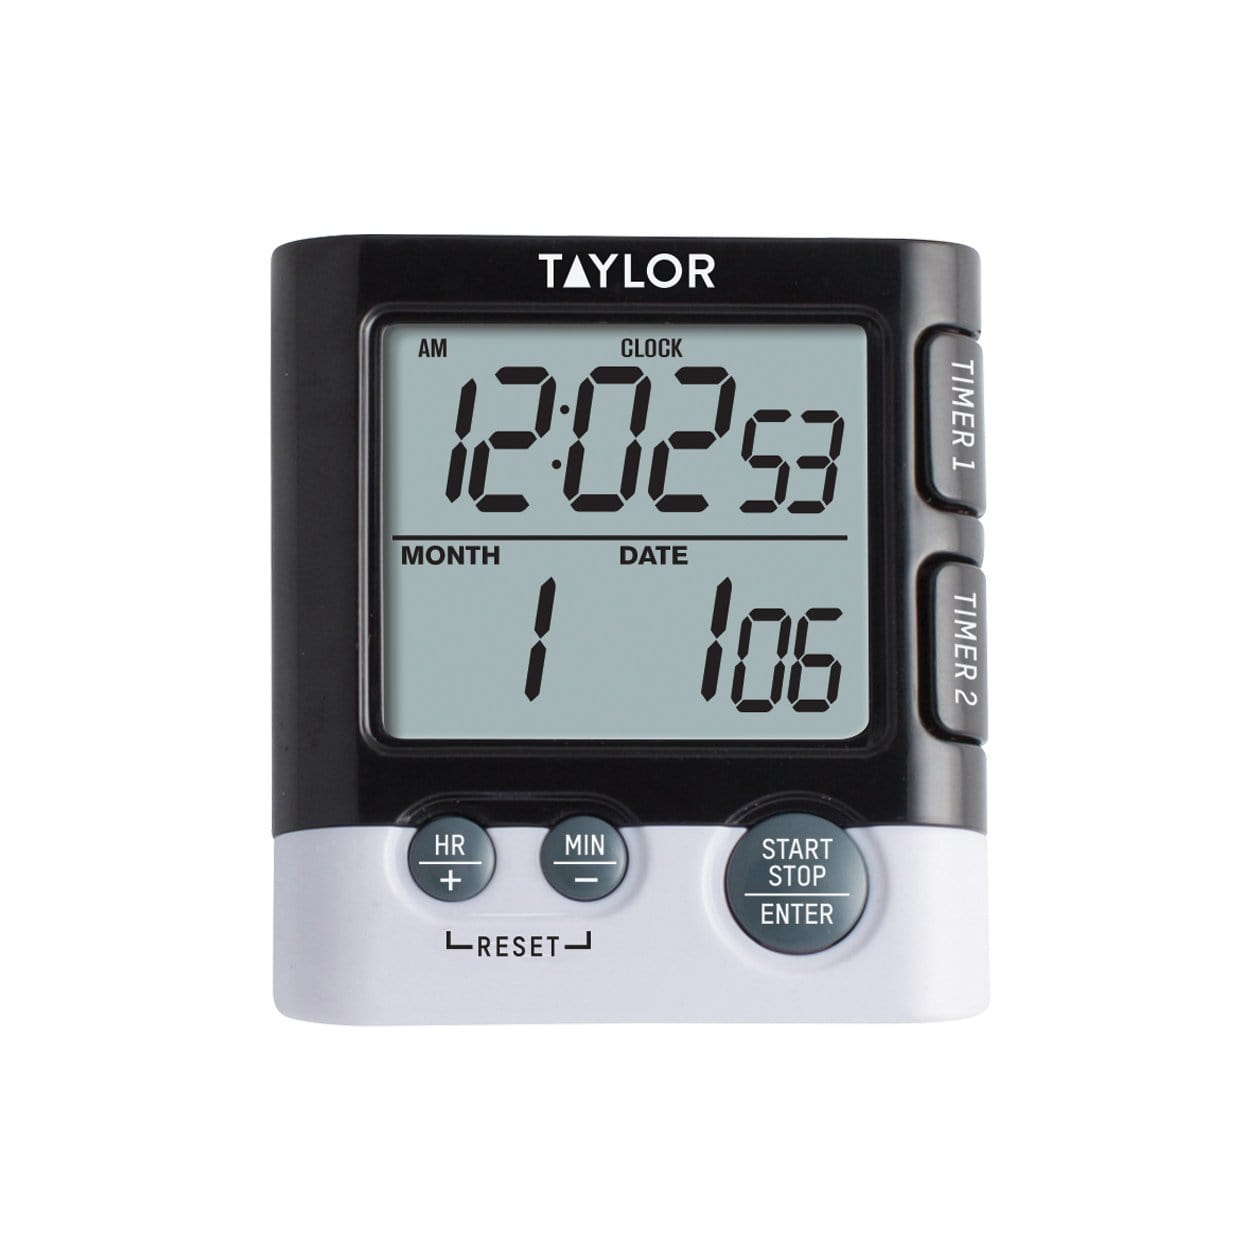 Taylor Dual Event Kitchen Timer - Black, 1 ct - Fry's Food Stores